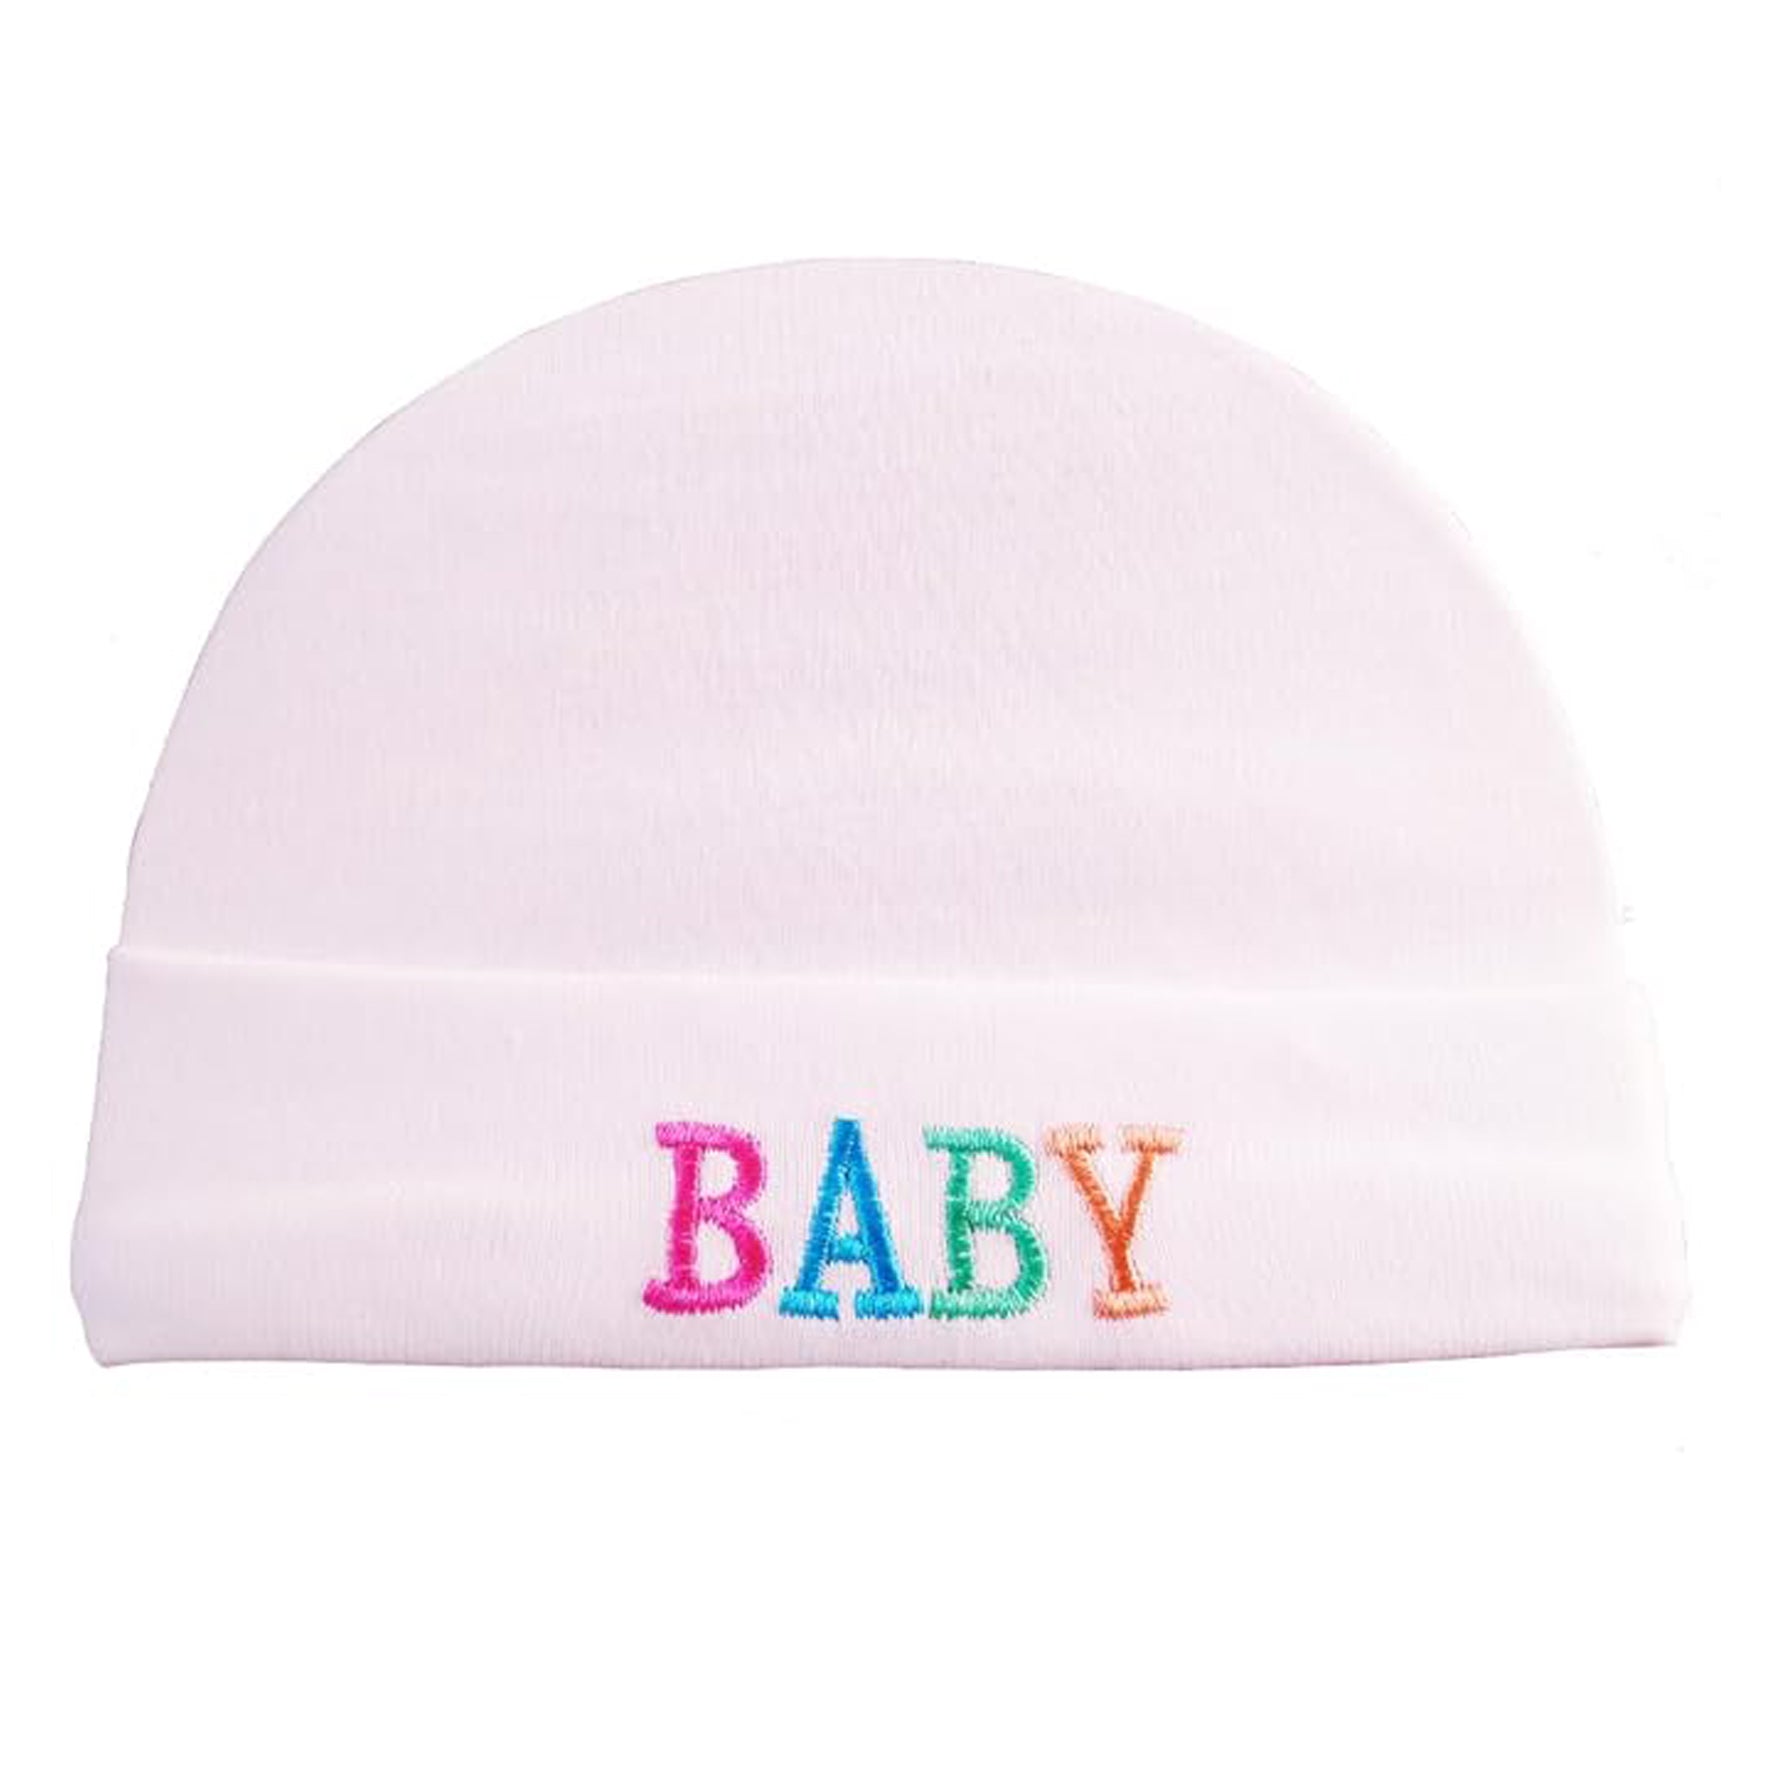 Kids Cotton Solid Latest Soft and Comfortable Casual Cap (White, 3-6 Months)